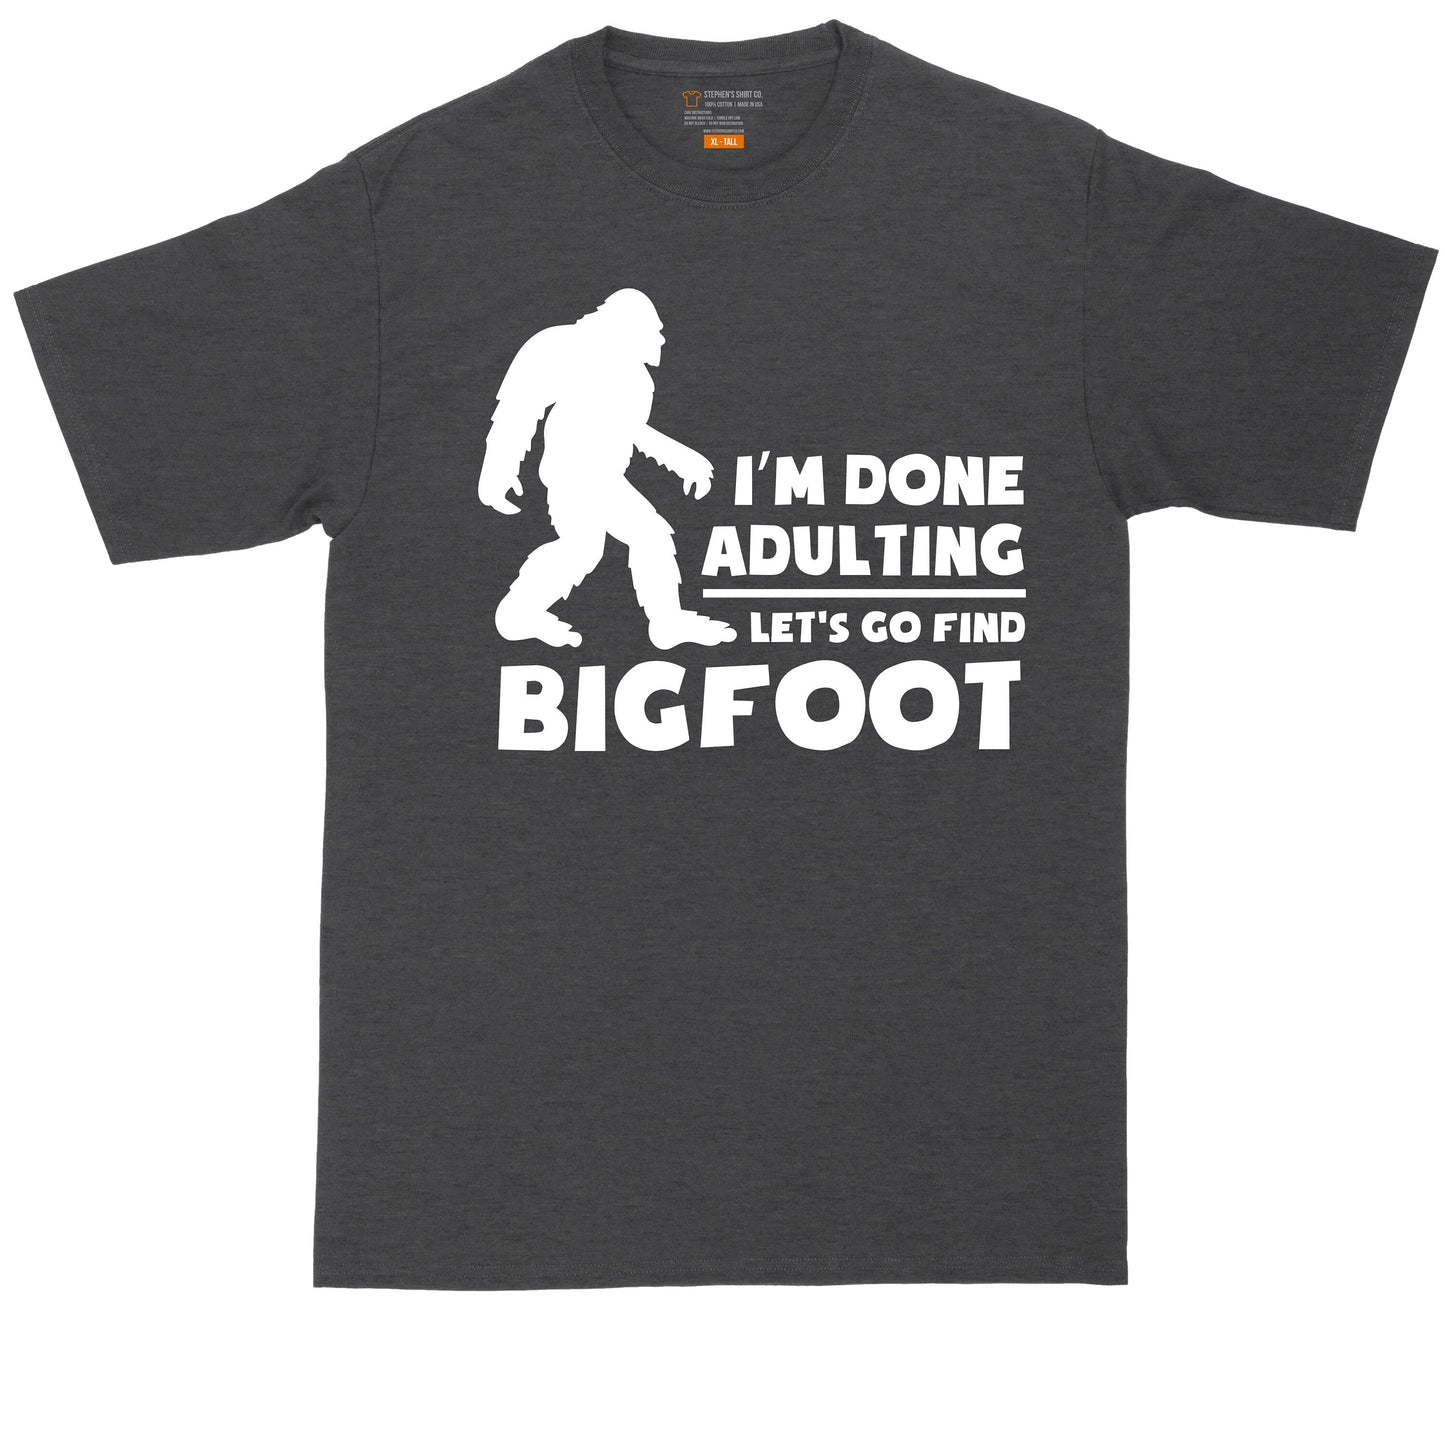 I'm Done Adulting Lets Go Find Bigfoot | Big and Tall Men T Shirt | Funny T-Shirt | Gamer Shirt | Graphic T-Shirt